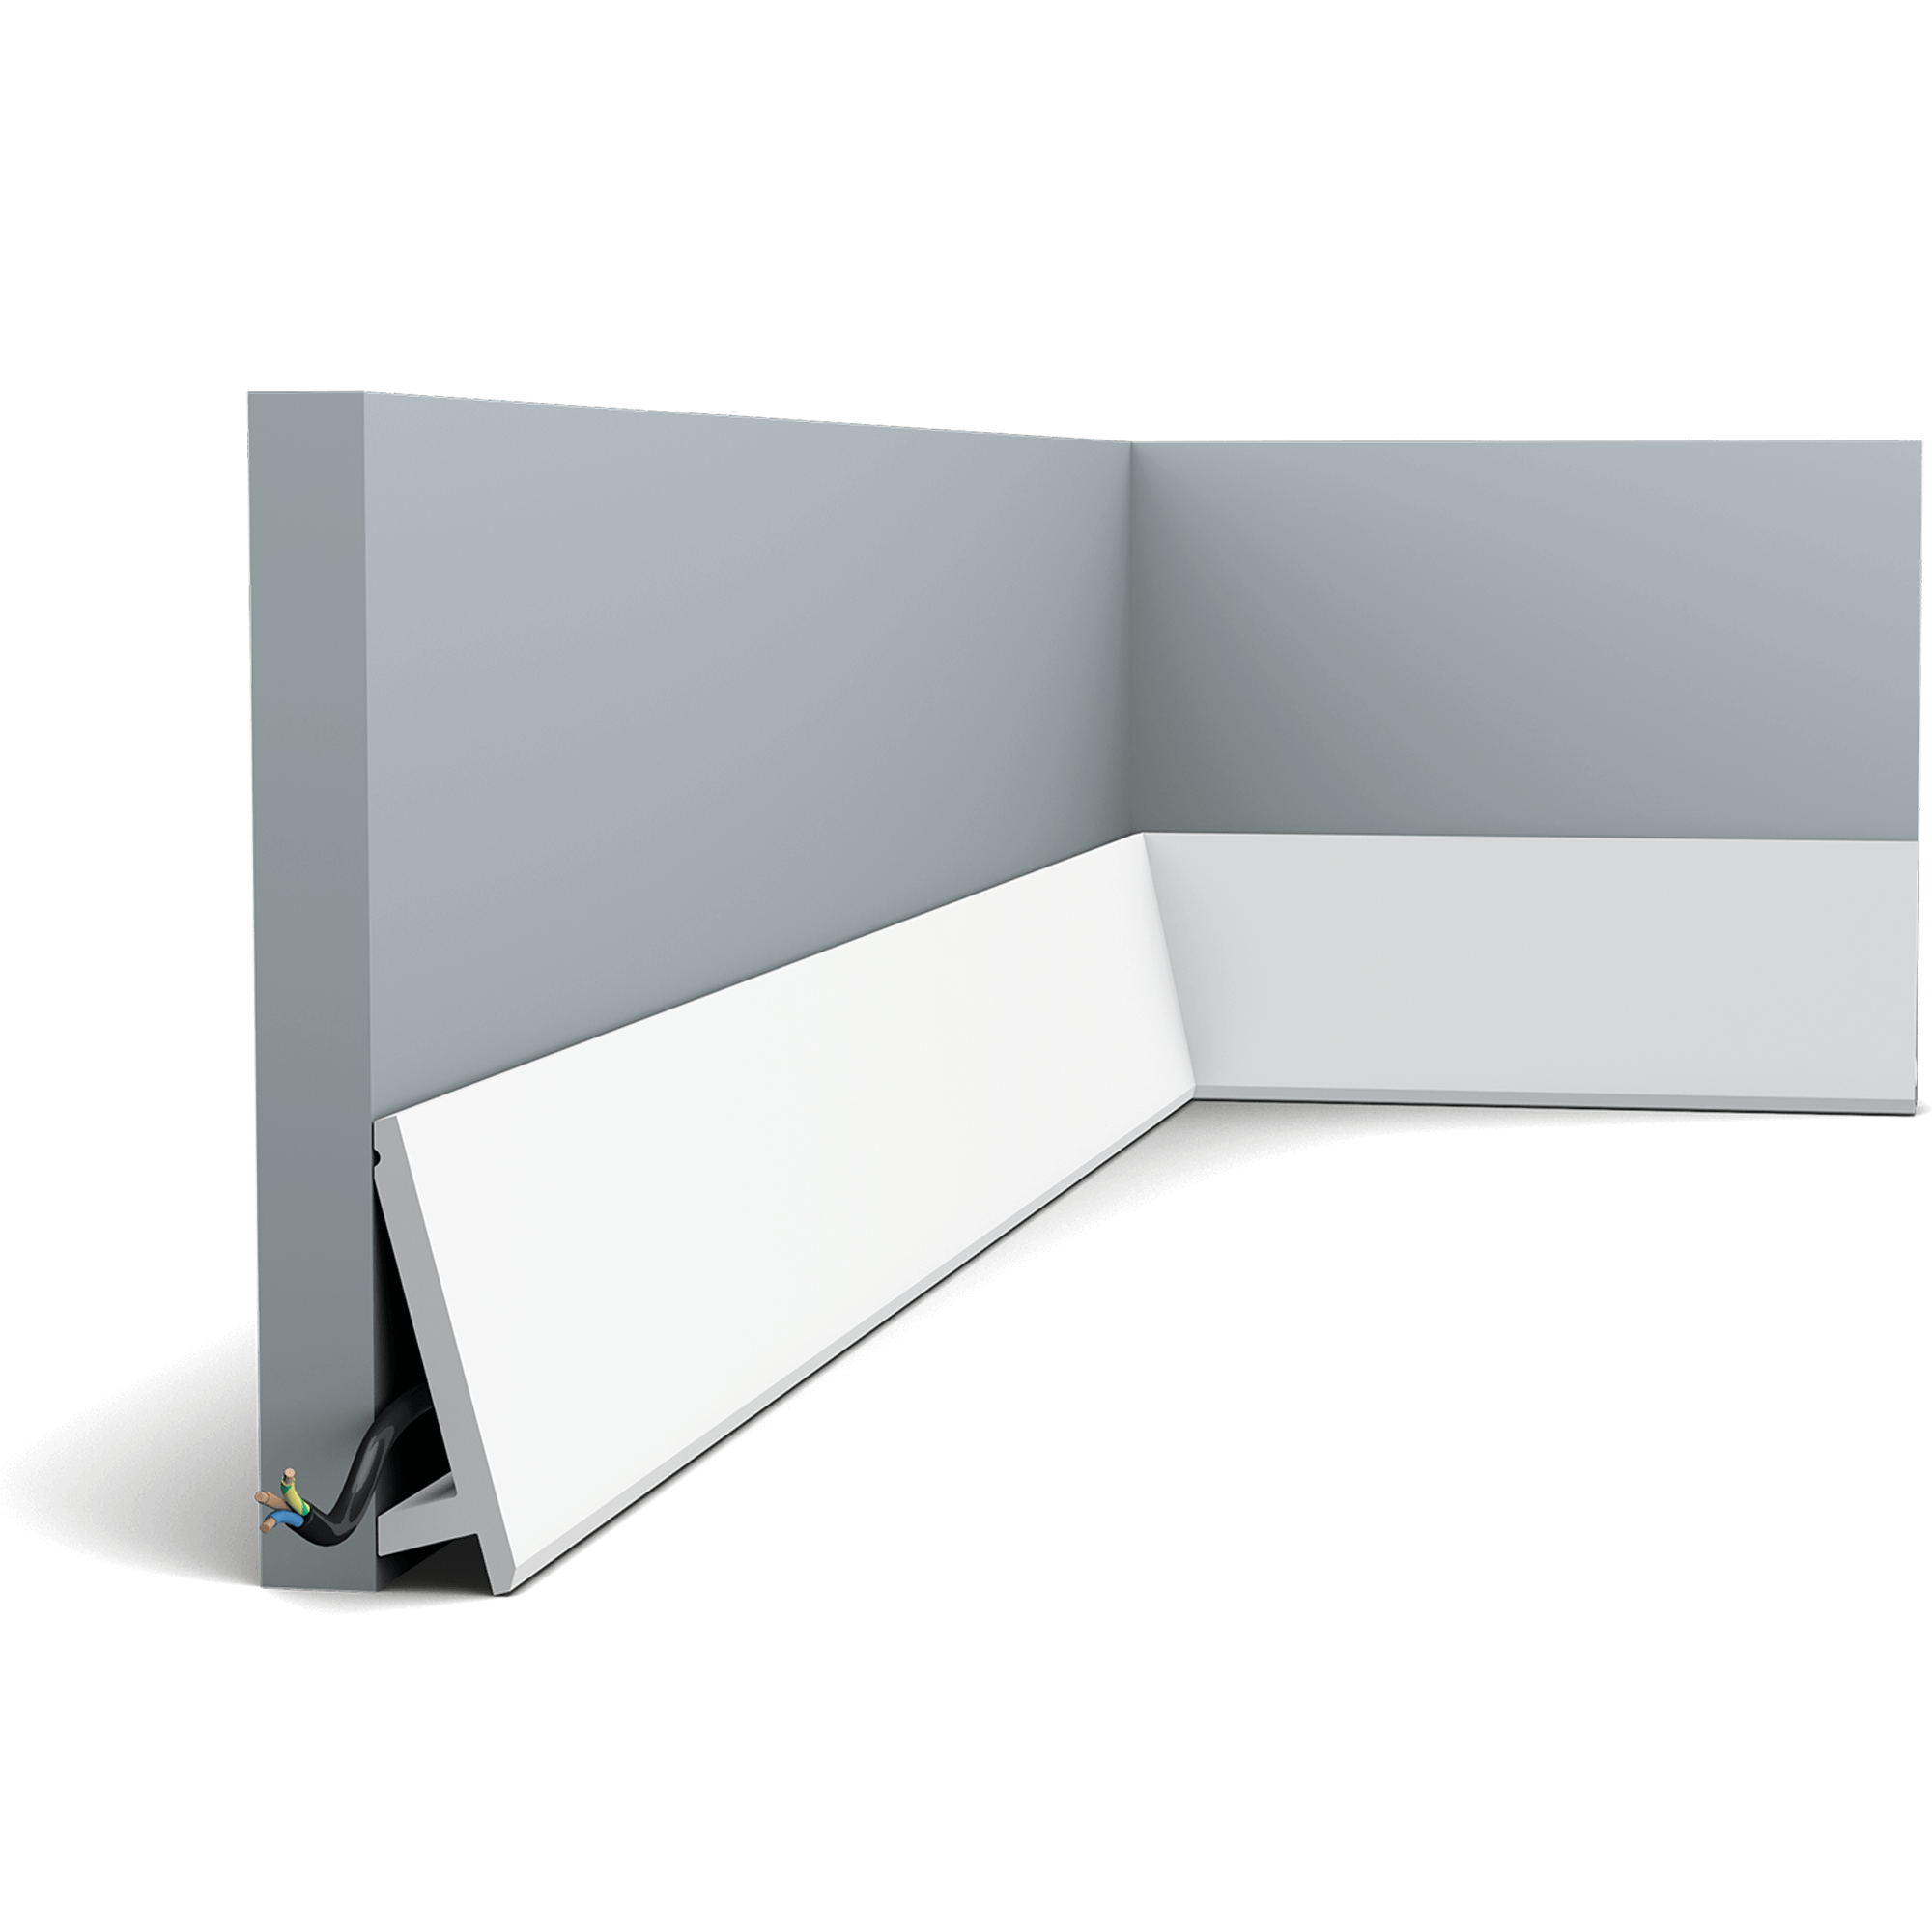 Clean, modern skirting board. Can also be used as up- or downlights.